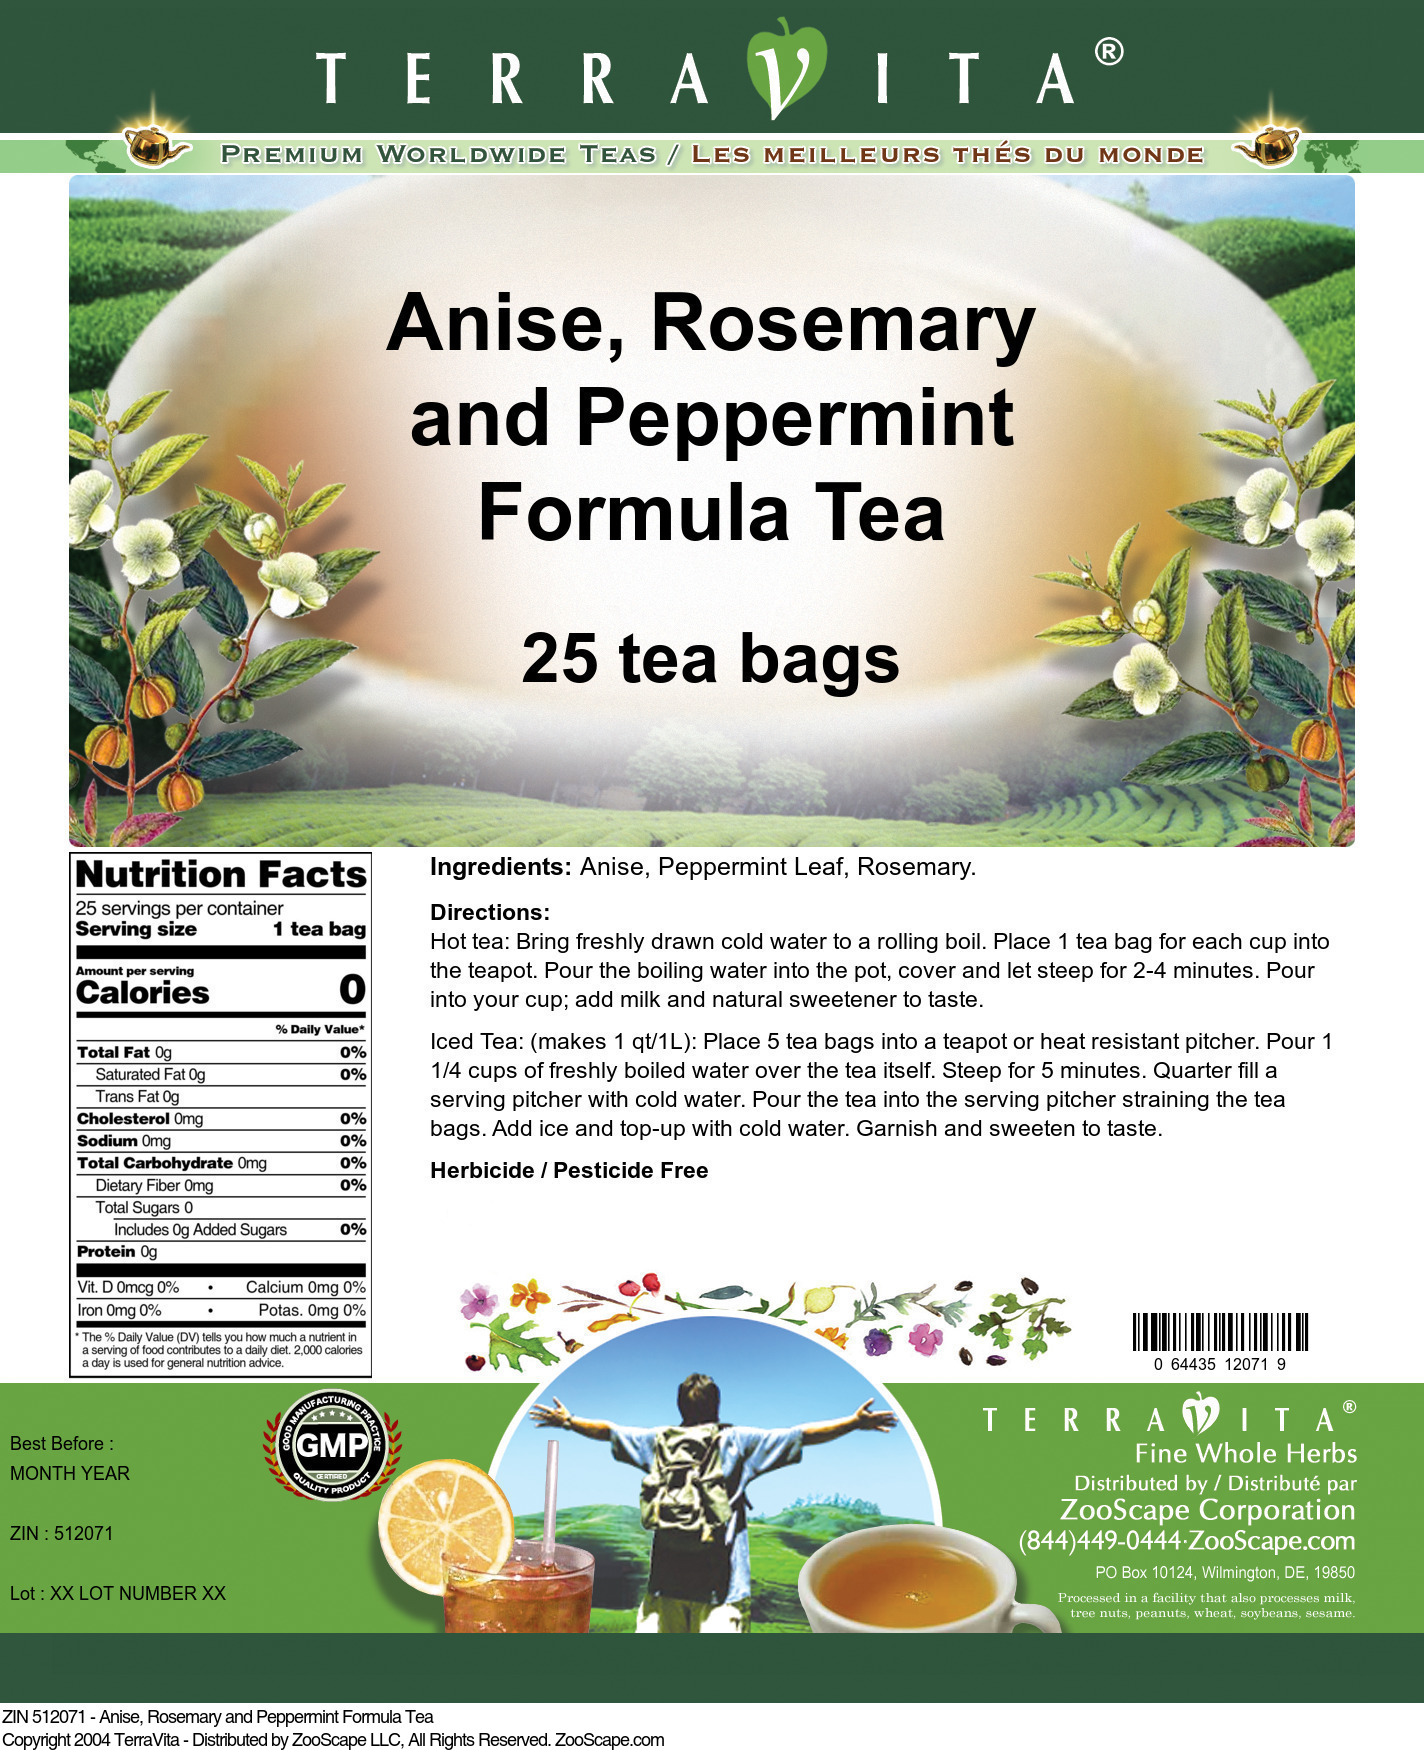 Anise, Rosemary and Peppermint Formula Tea - Label